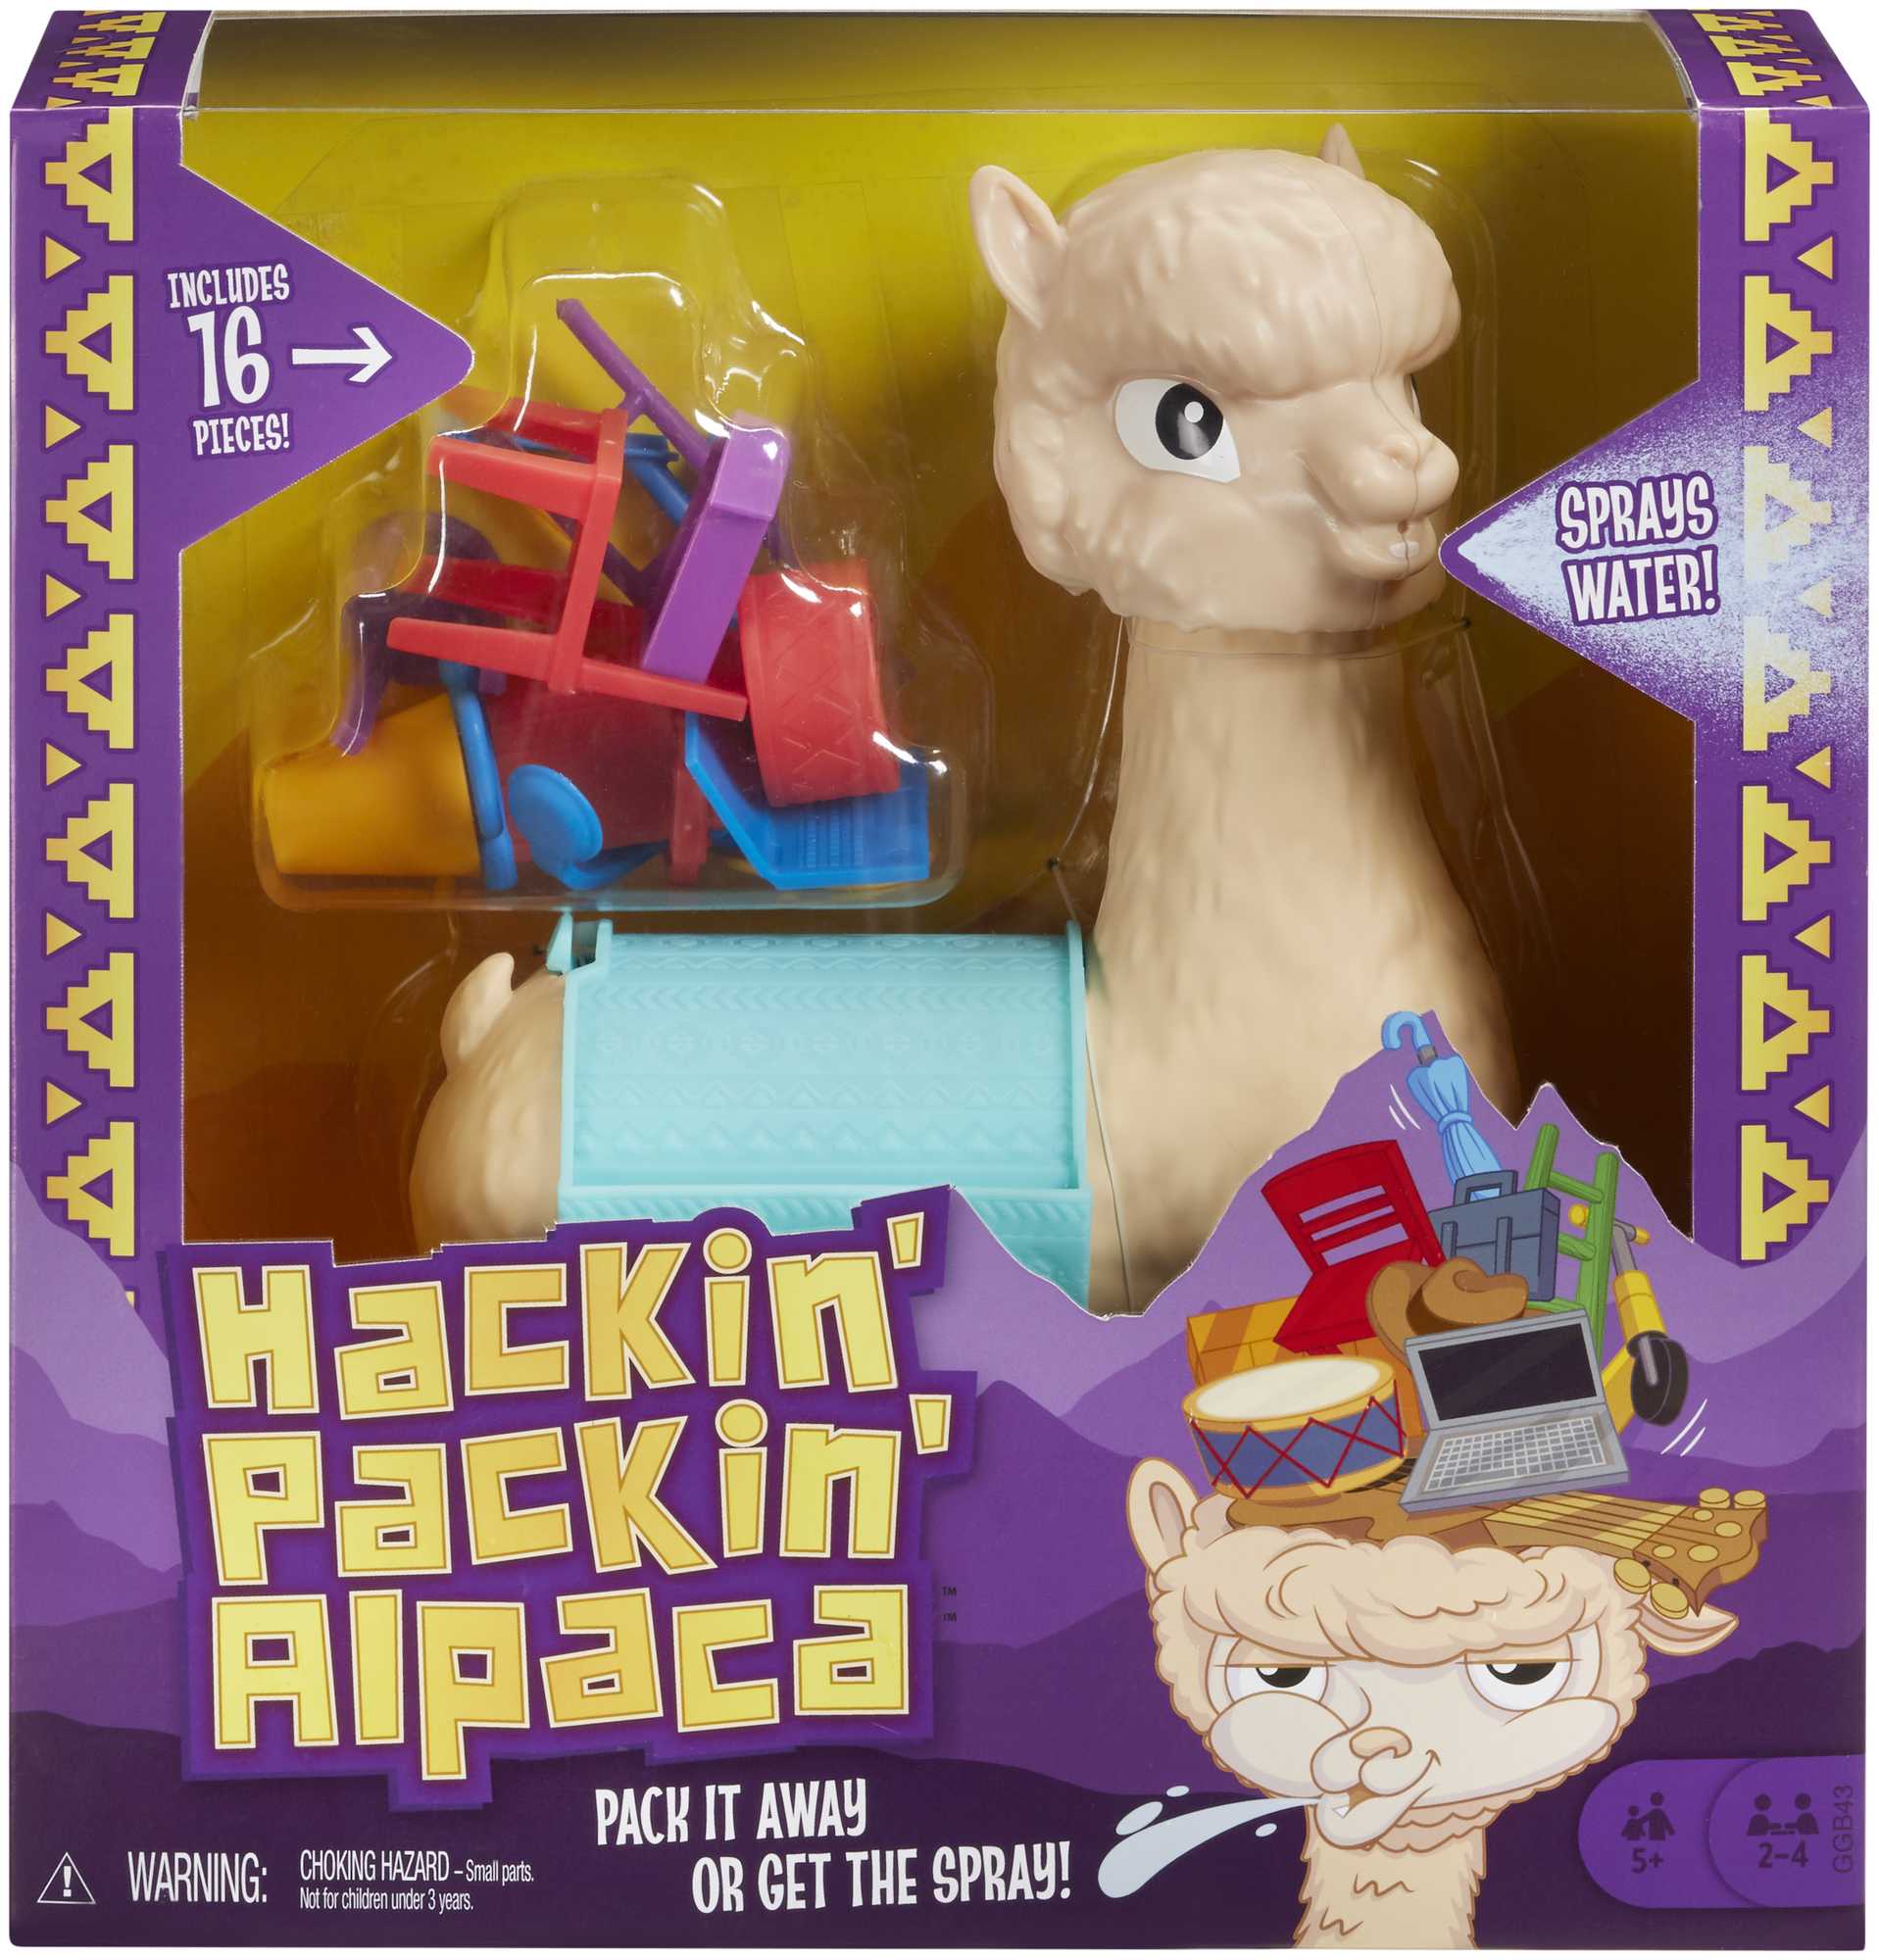 Hackin' Packin' Alpaca Kids Game, Quickly Stack Pieces & Al Sprays Water, Family & Kids Game Nights - image 1 of 6